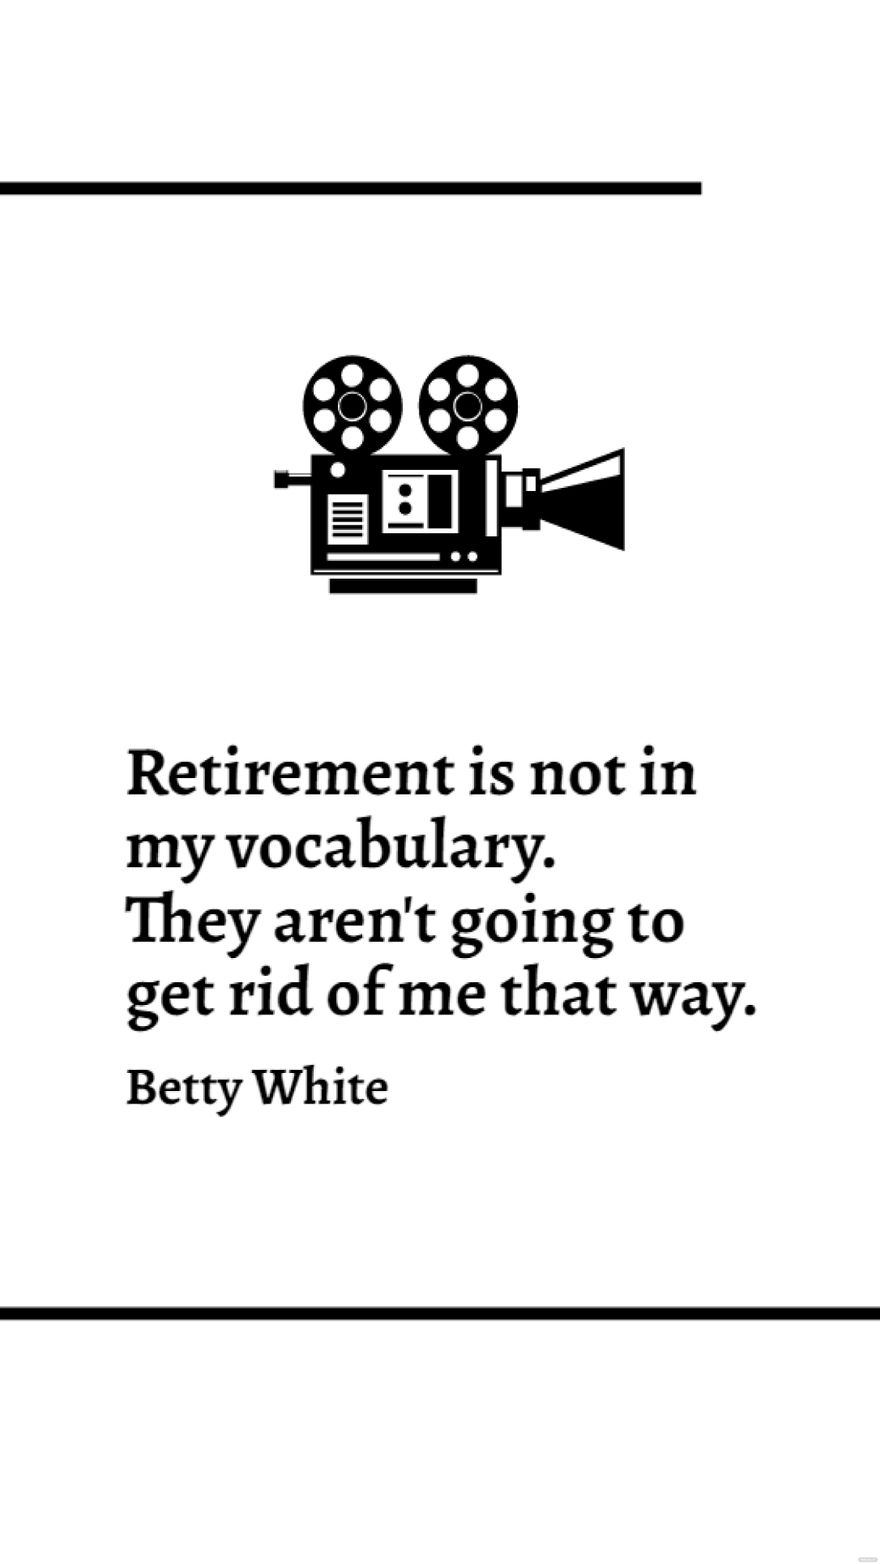 Free Betty White - Retirement is not in my vocabulary. They aren't going to get rid of me that way. in JPG